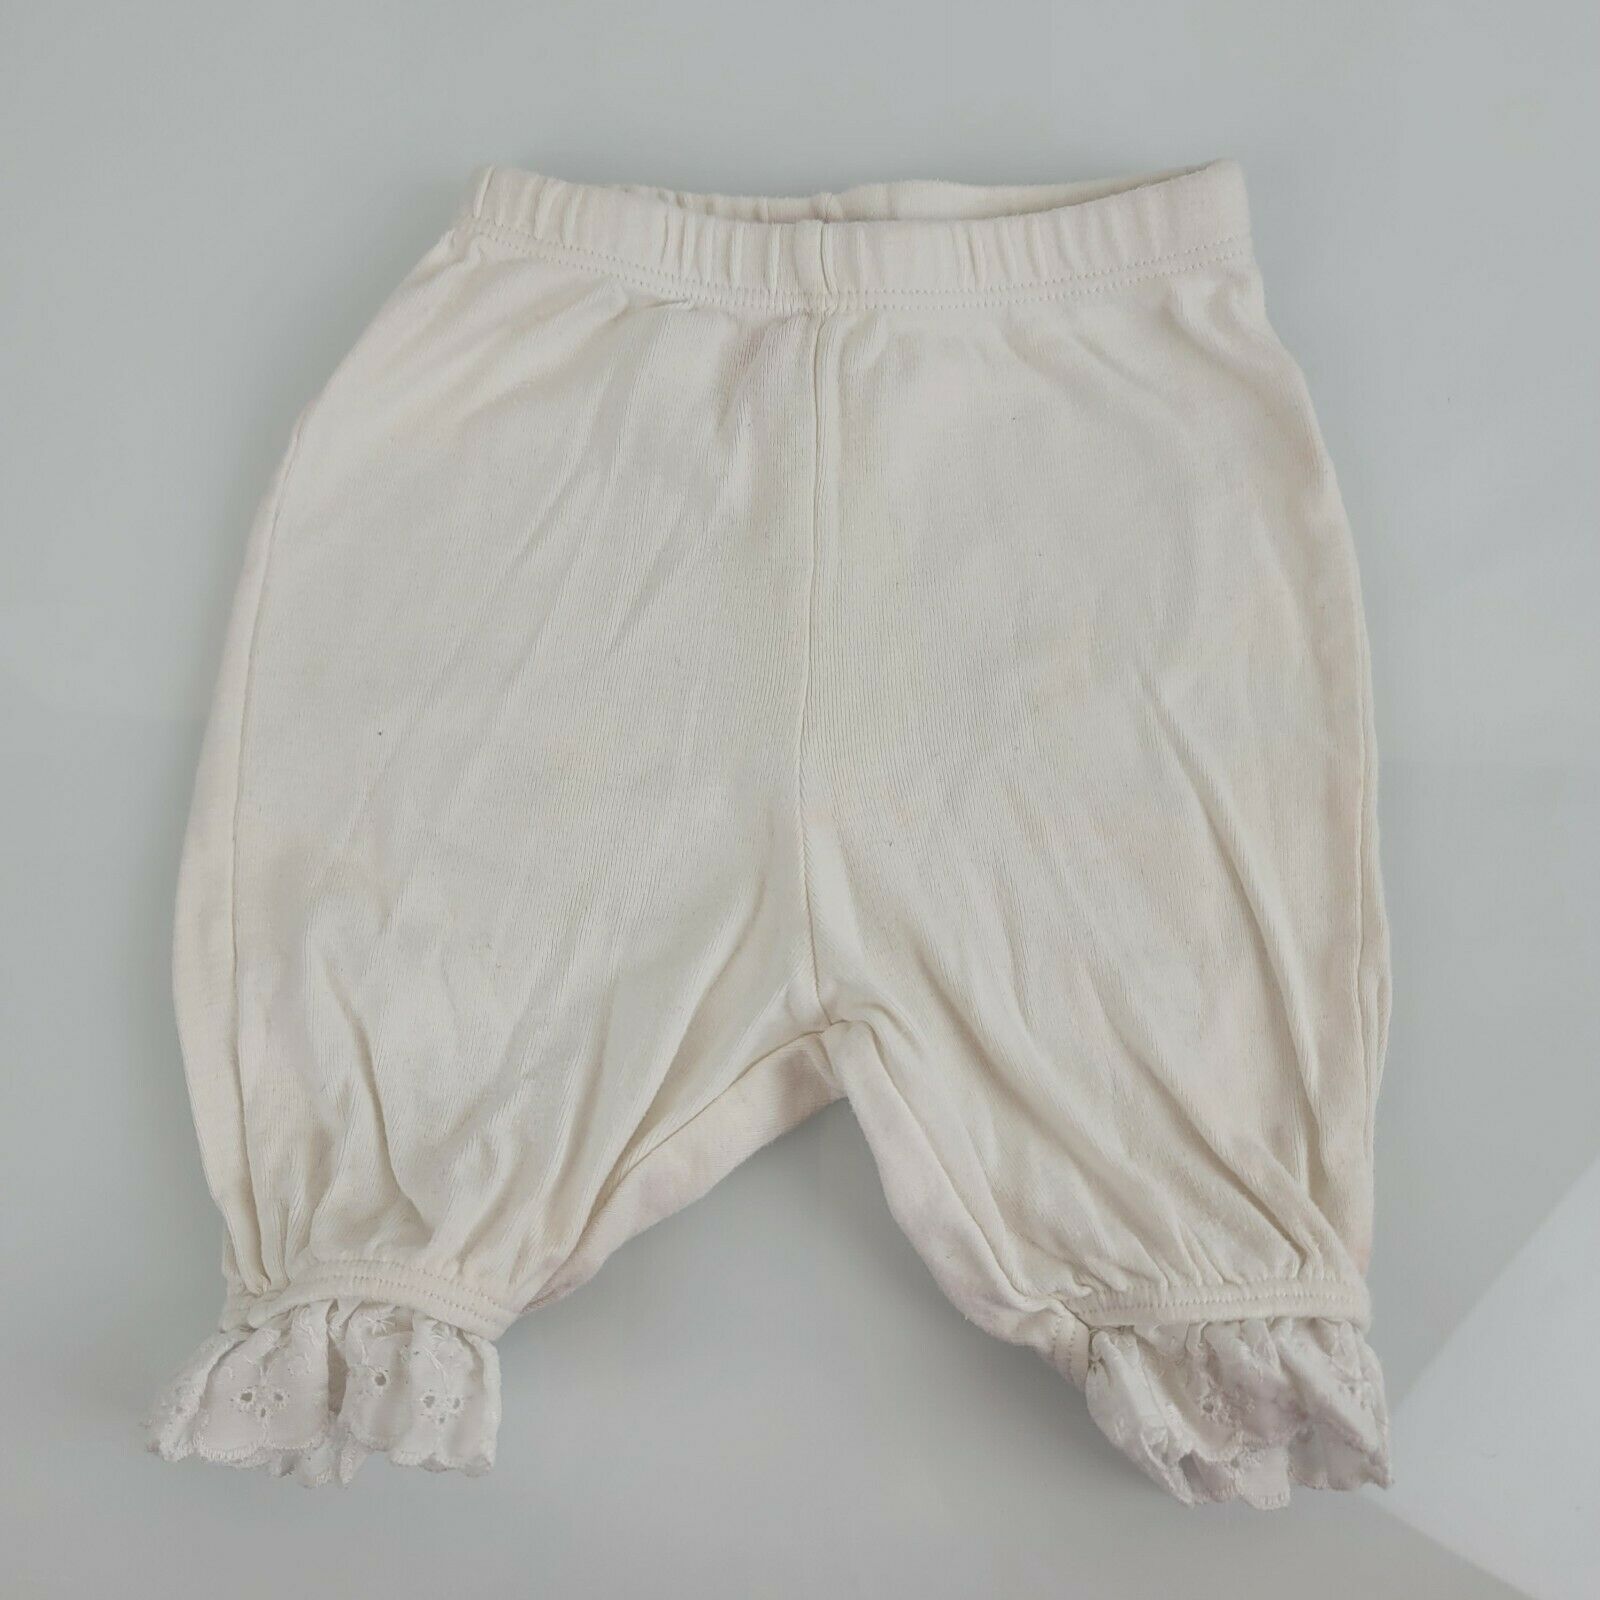 Primary image for Hanna Andersson Vintage Bloomers Pantaloons White Lace Pants Under Dress 0-6 50